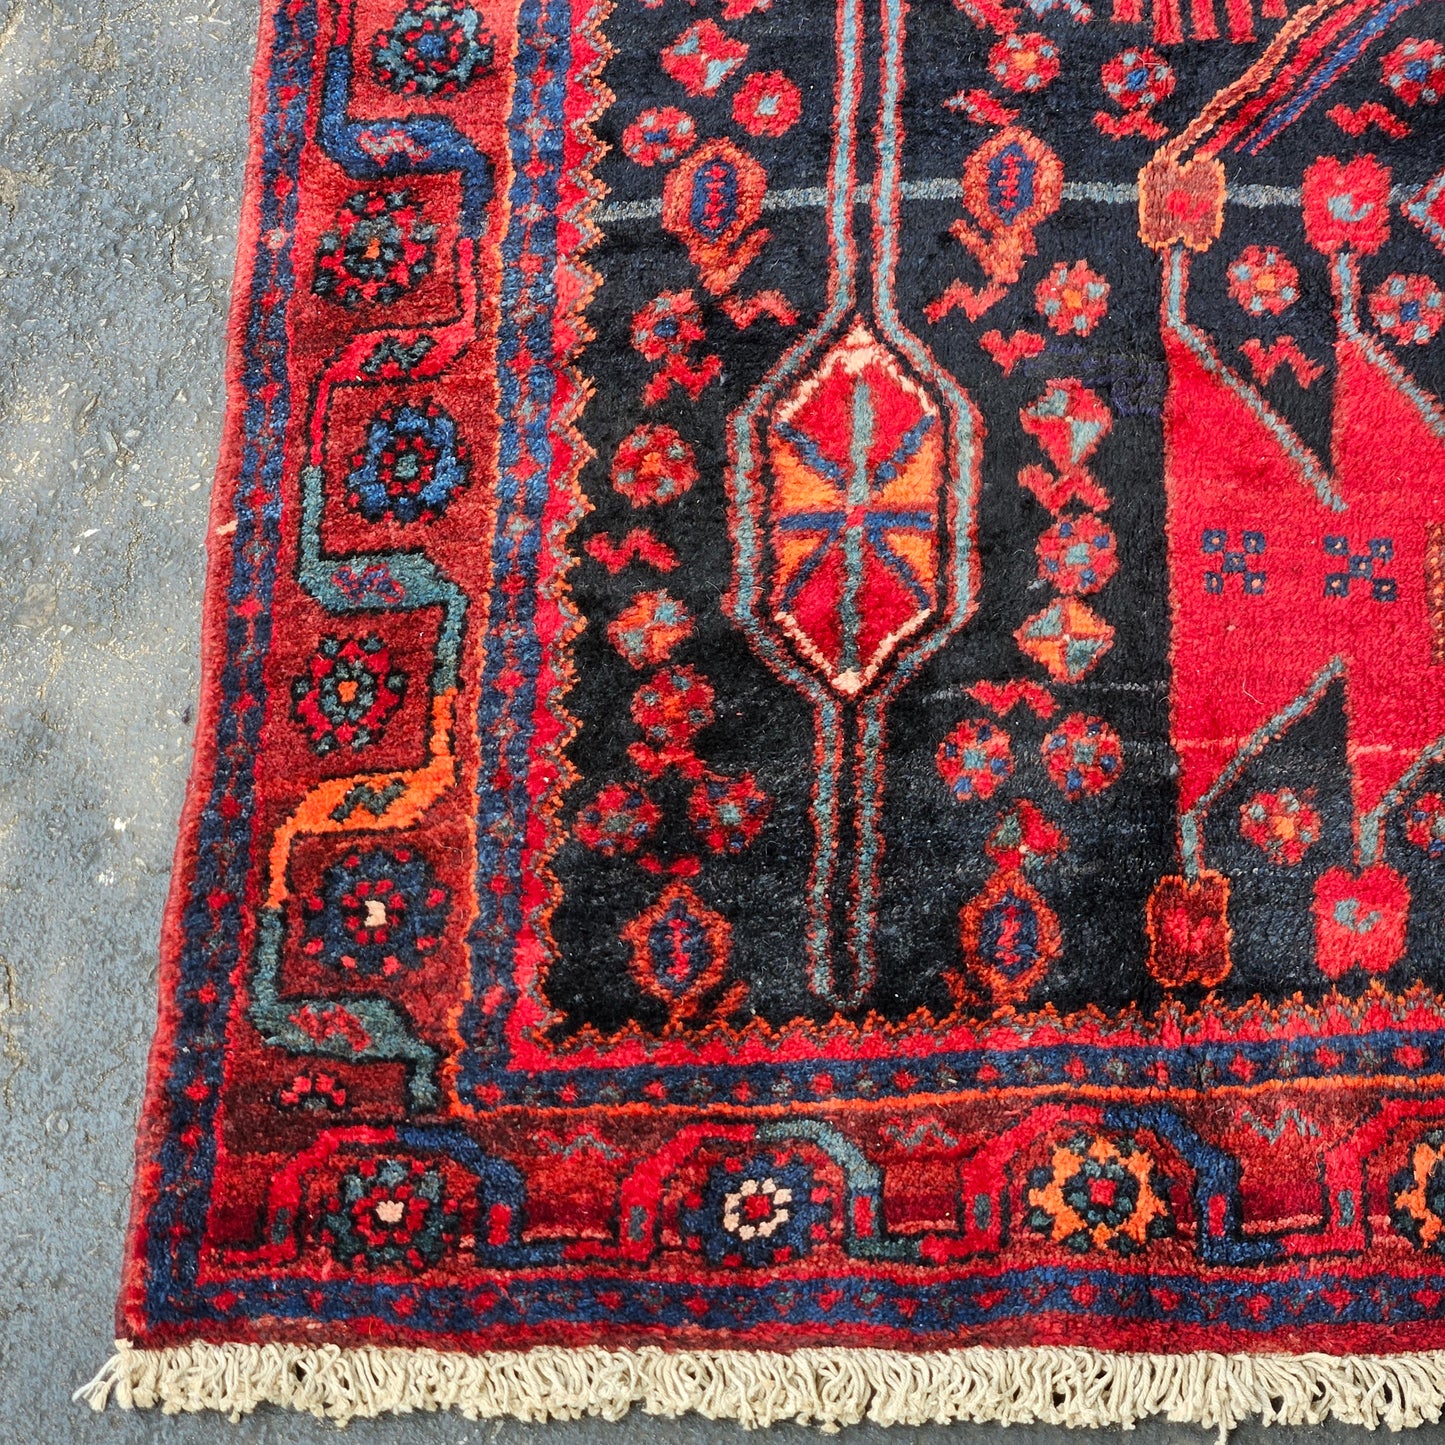 Vintage Hand Knotted 100% Wool Rug / Carpet / Runner - 4' 4" x 12' 2"